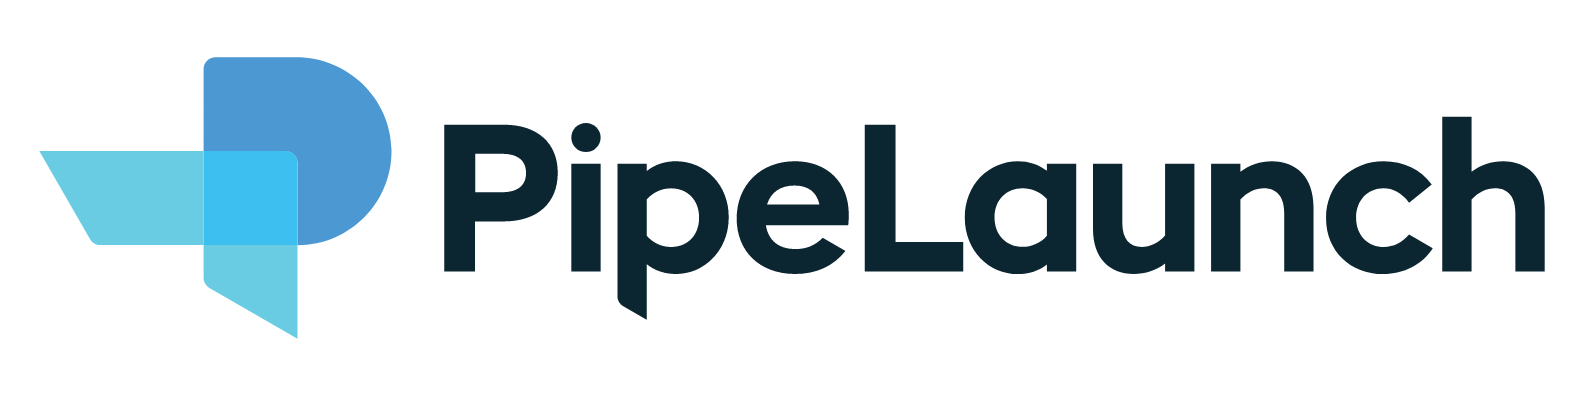 PipeLaunch Announces Salesforce Thought Leader Ben McCarthy to Join Strategic Advisory Board